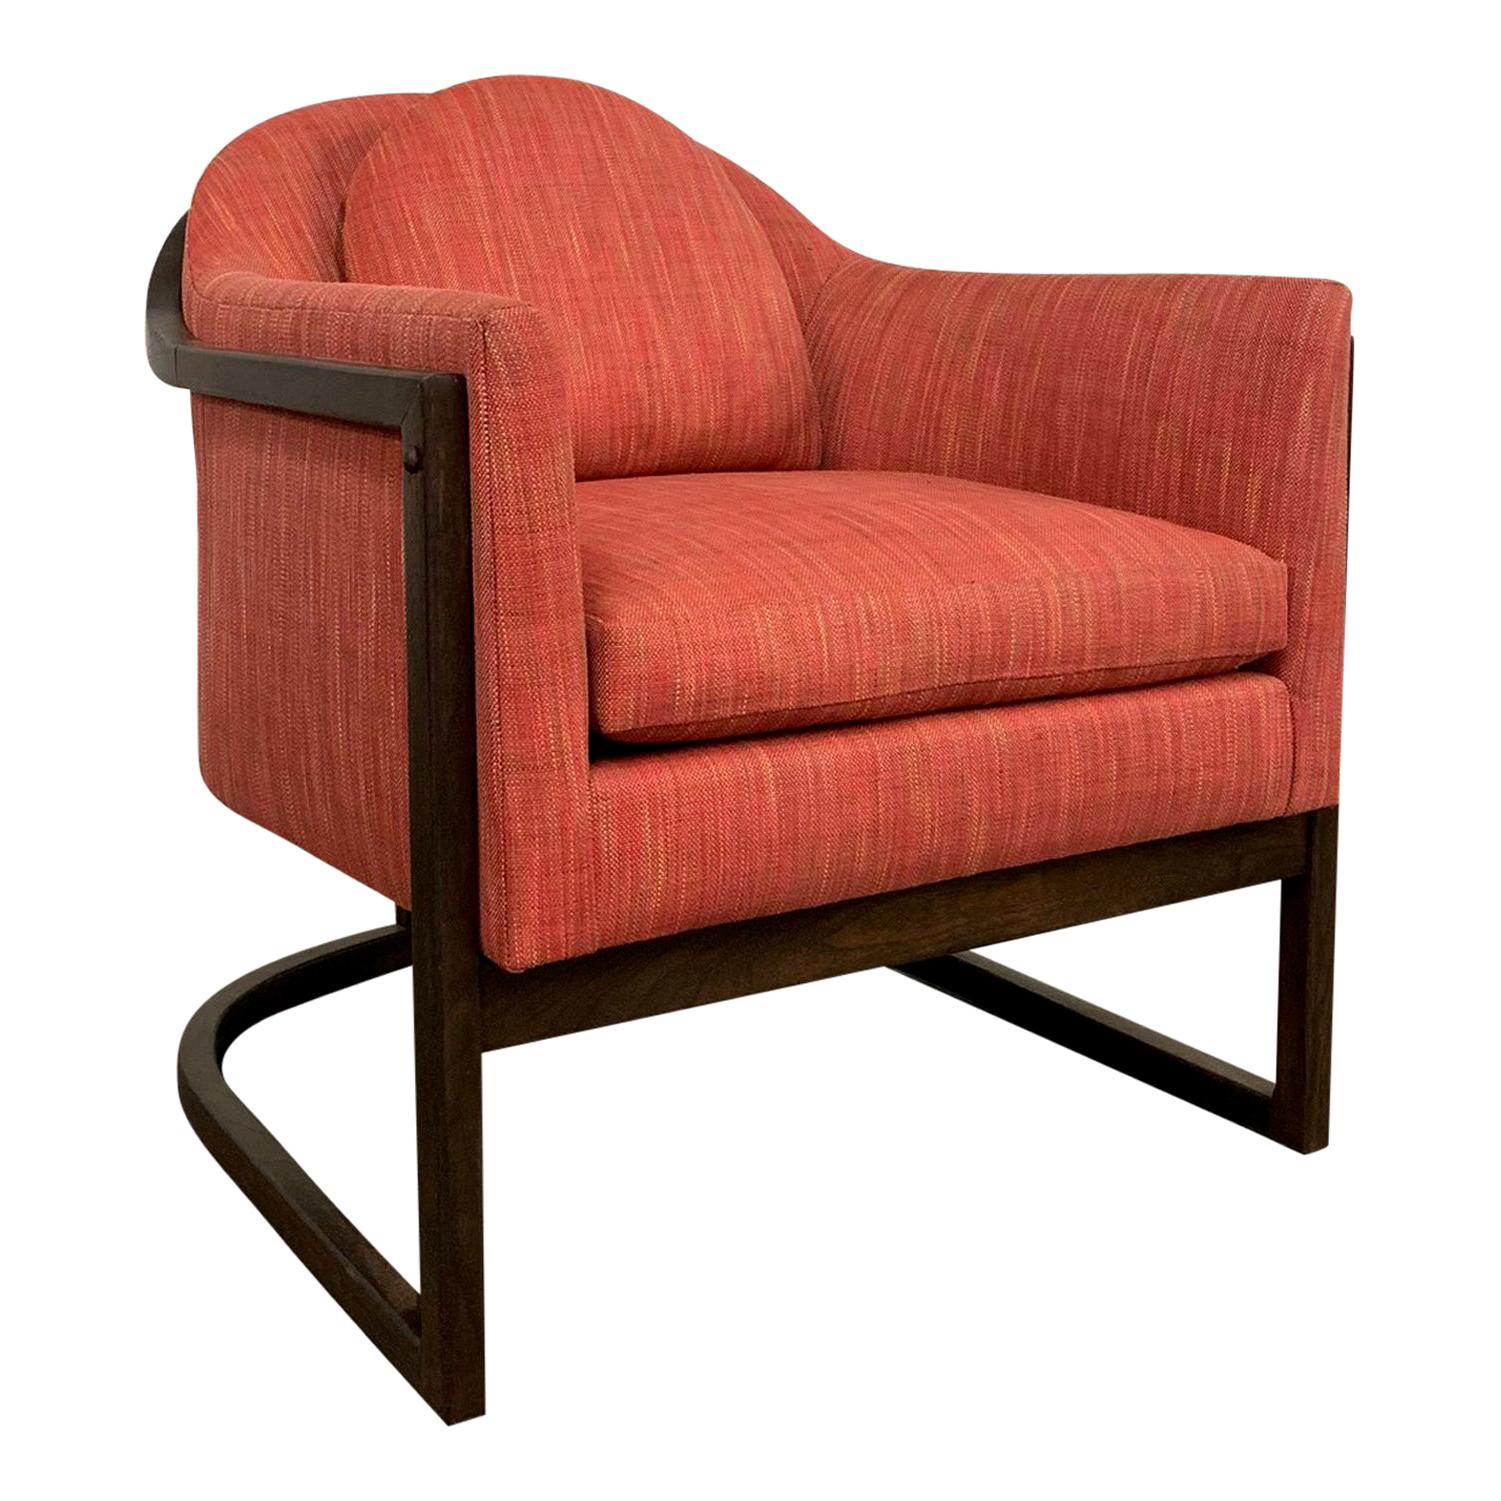 Mid-Century Modern Upholstered Barrel Club Chair Attributed to Harvey Probber